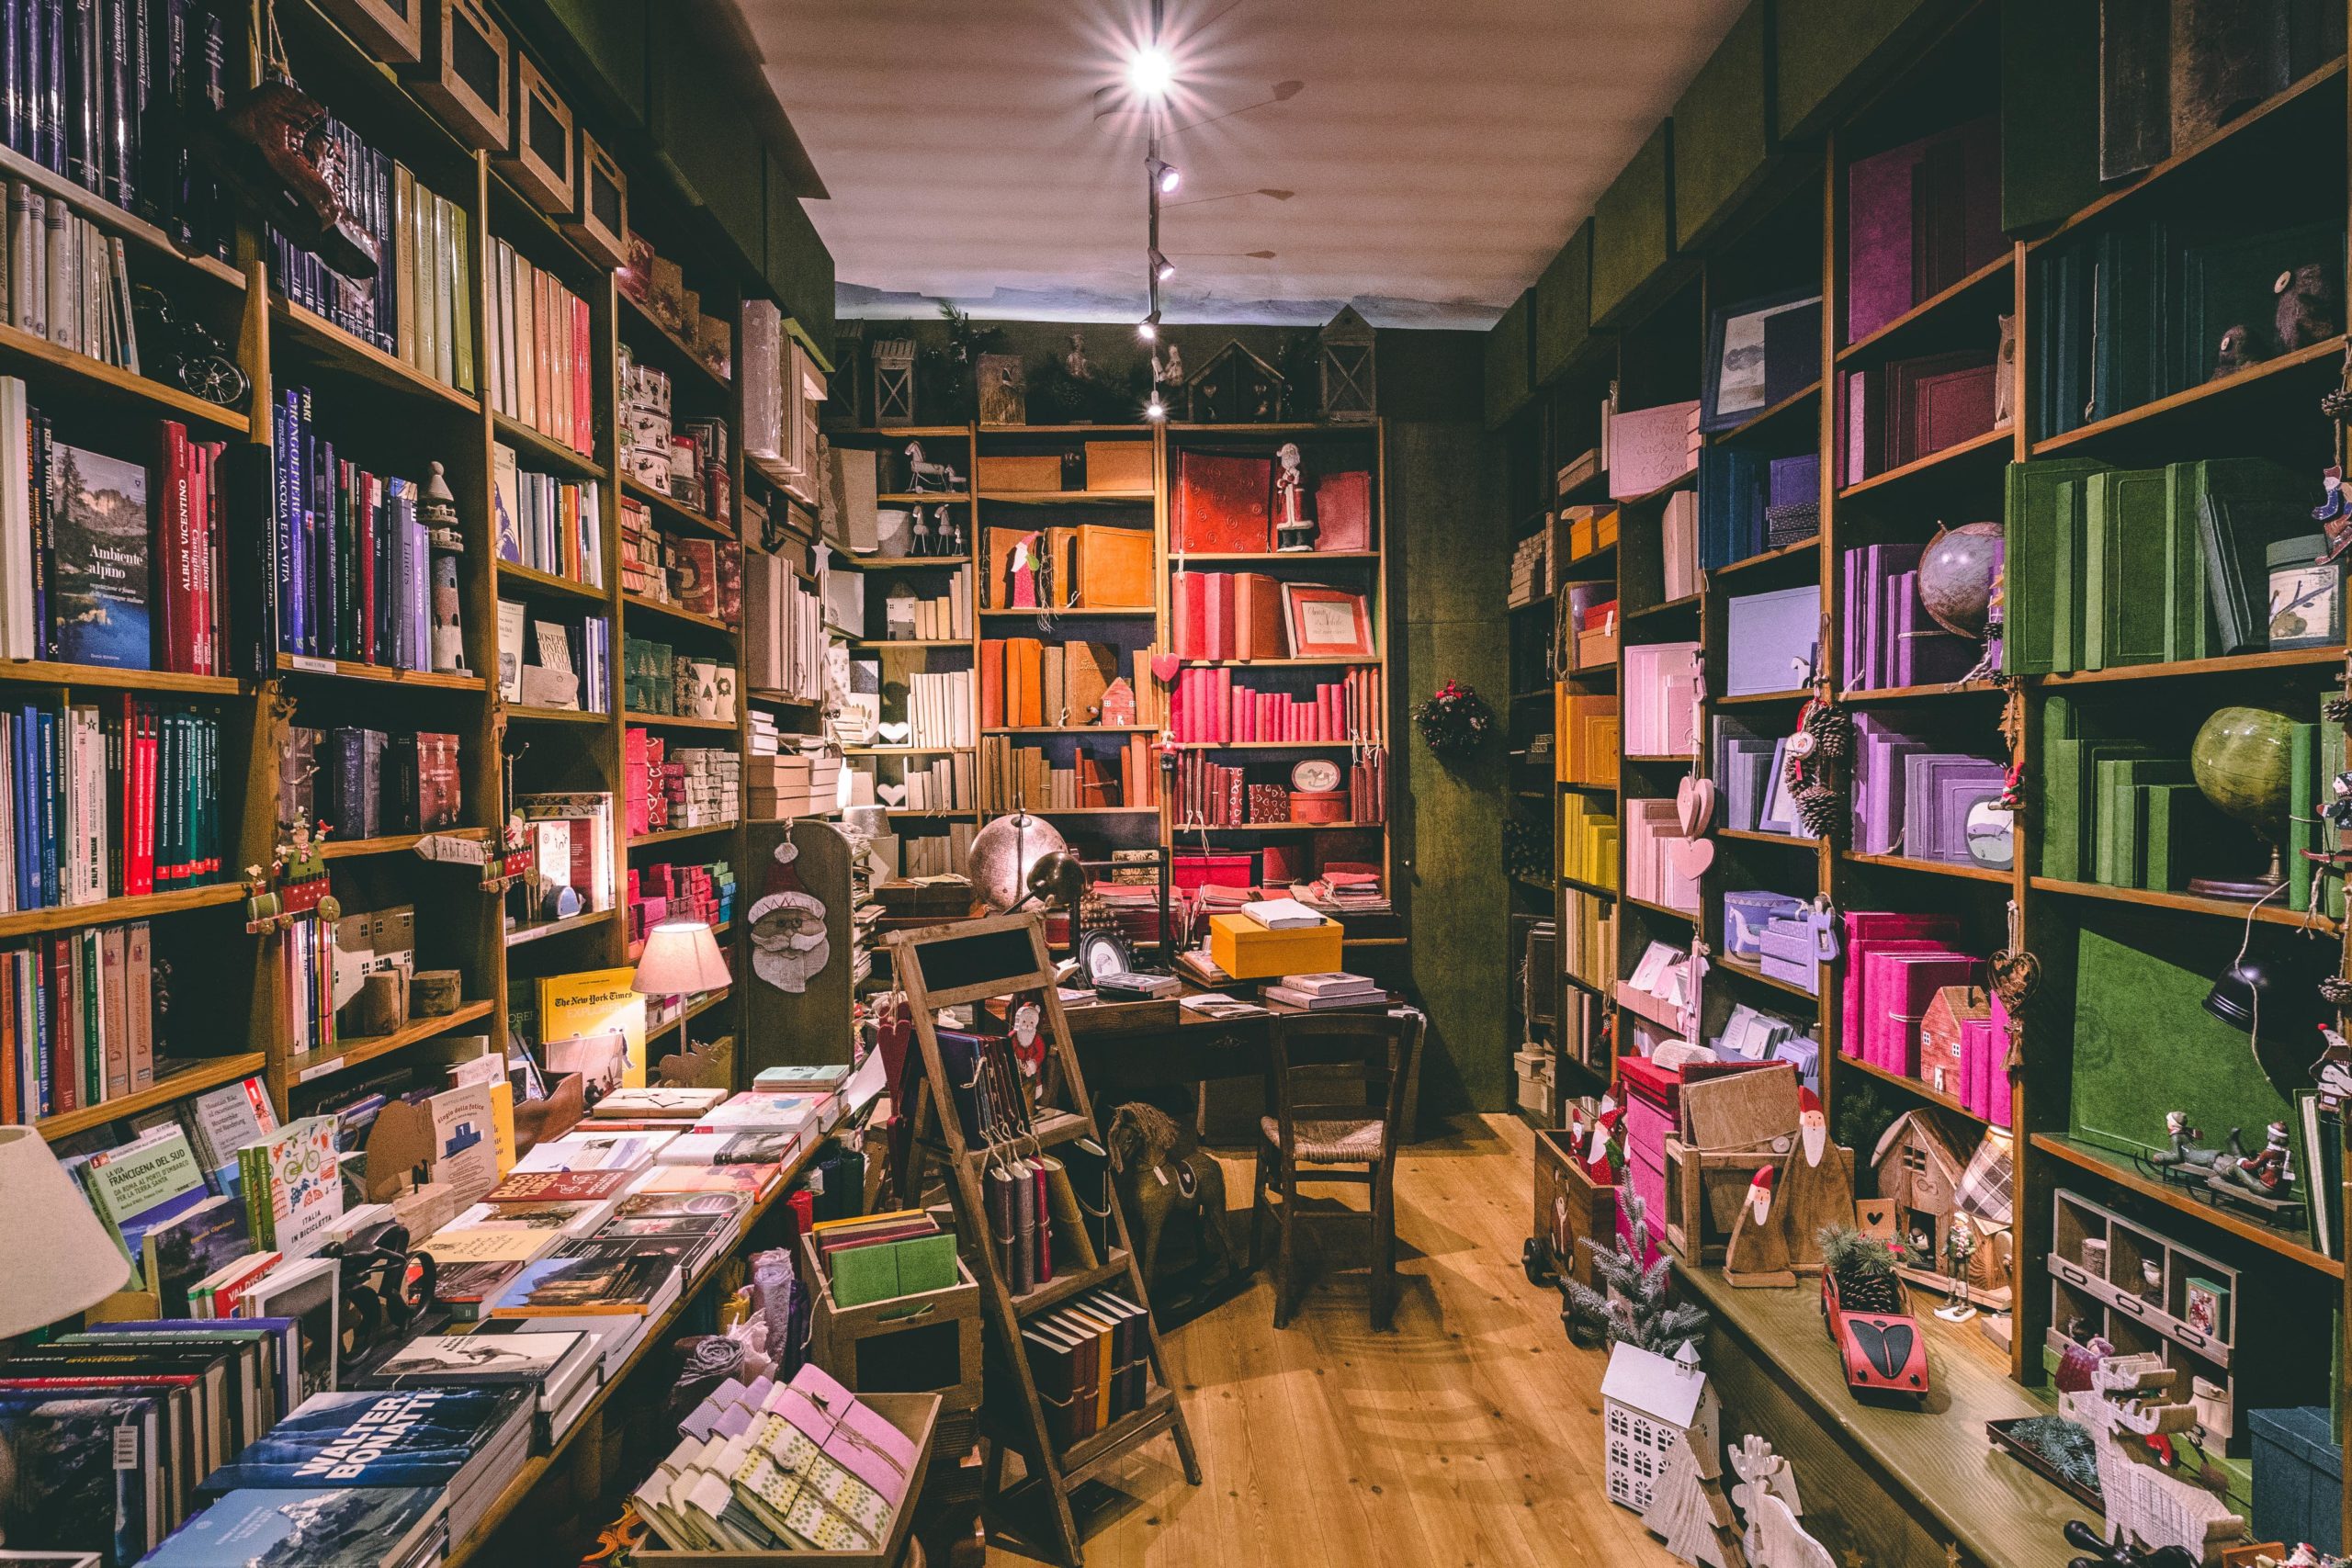 15 ways to support writers, publishers and booksellers